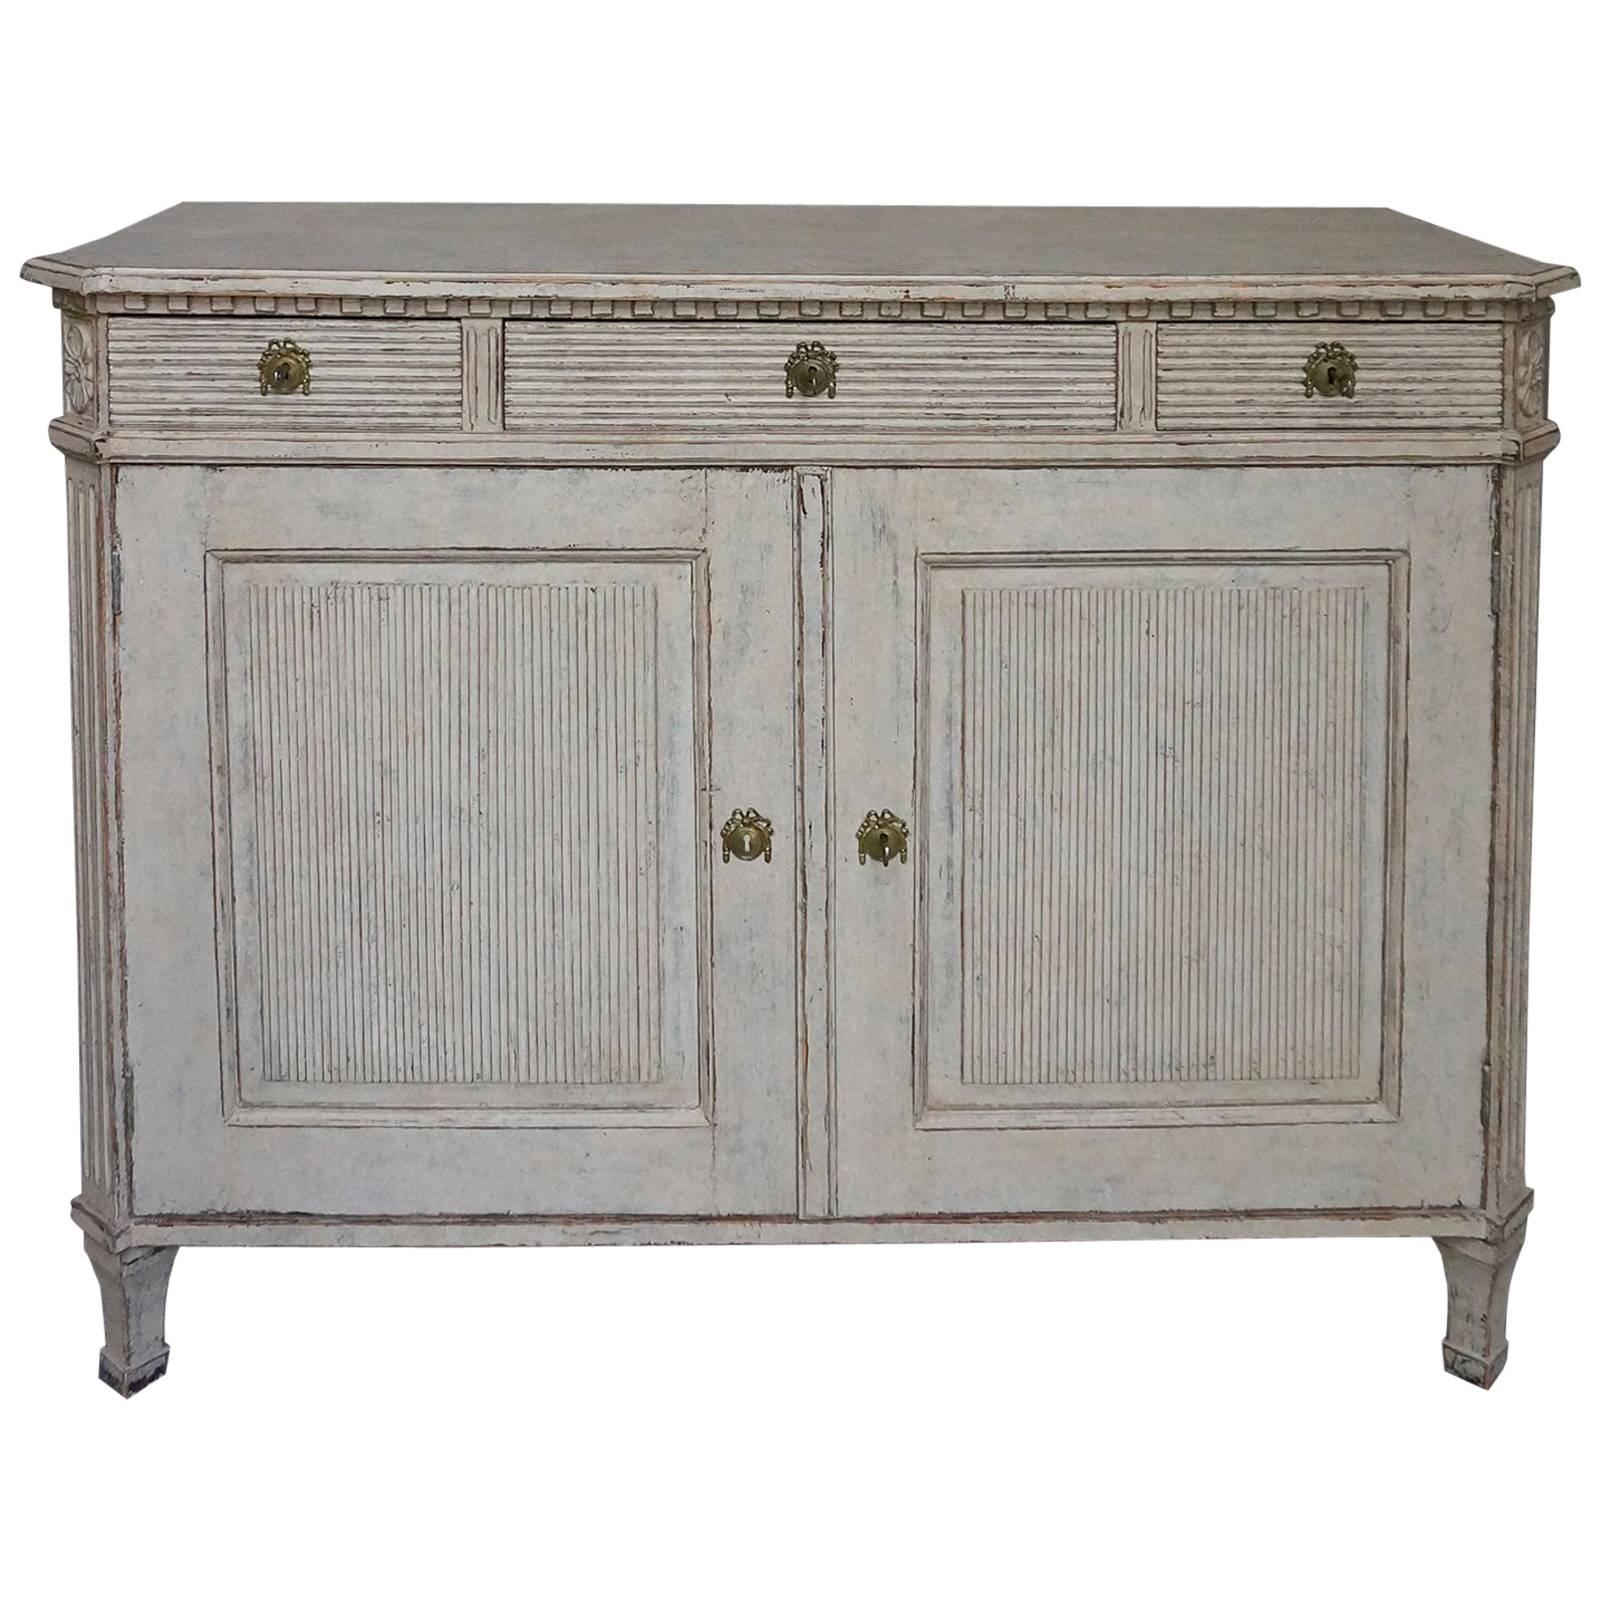 Gustavian Style Sideboard with Reeded Detail